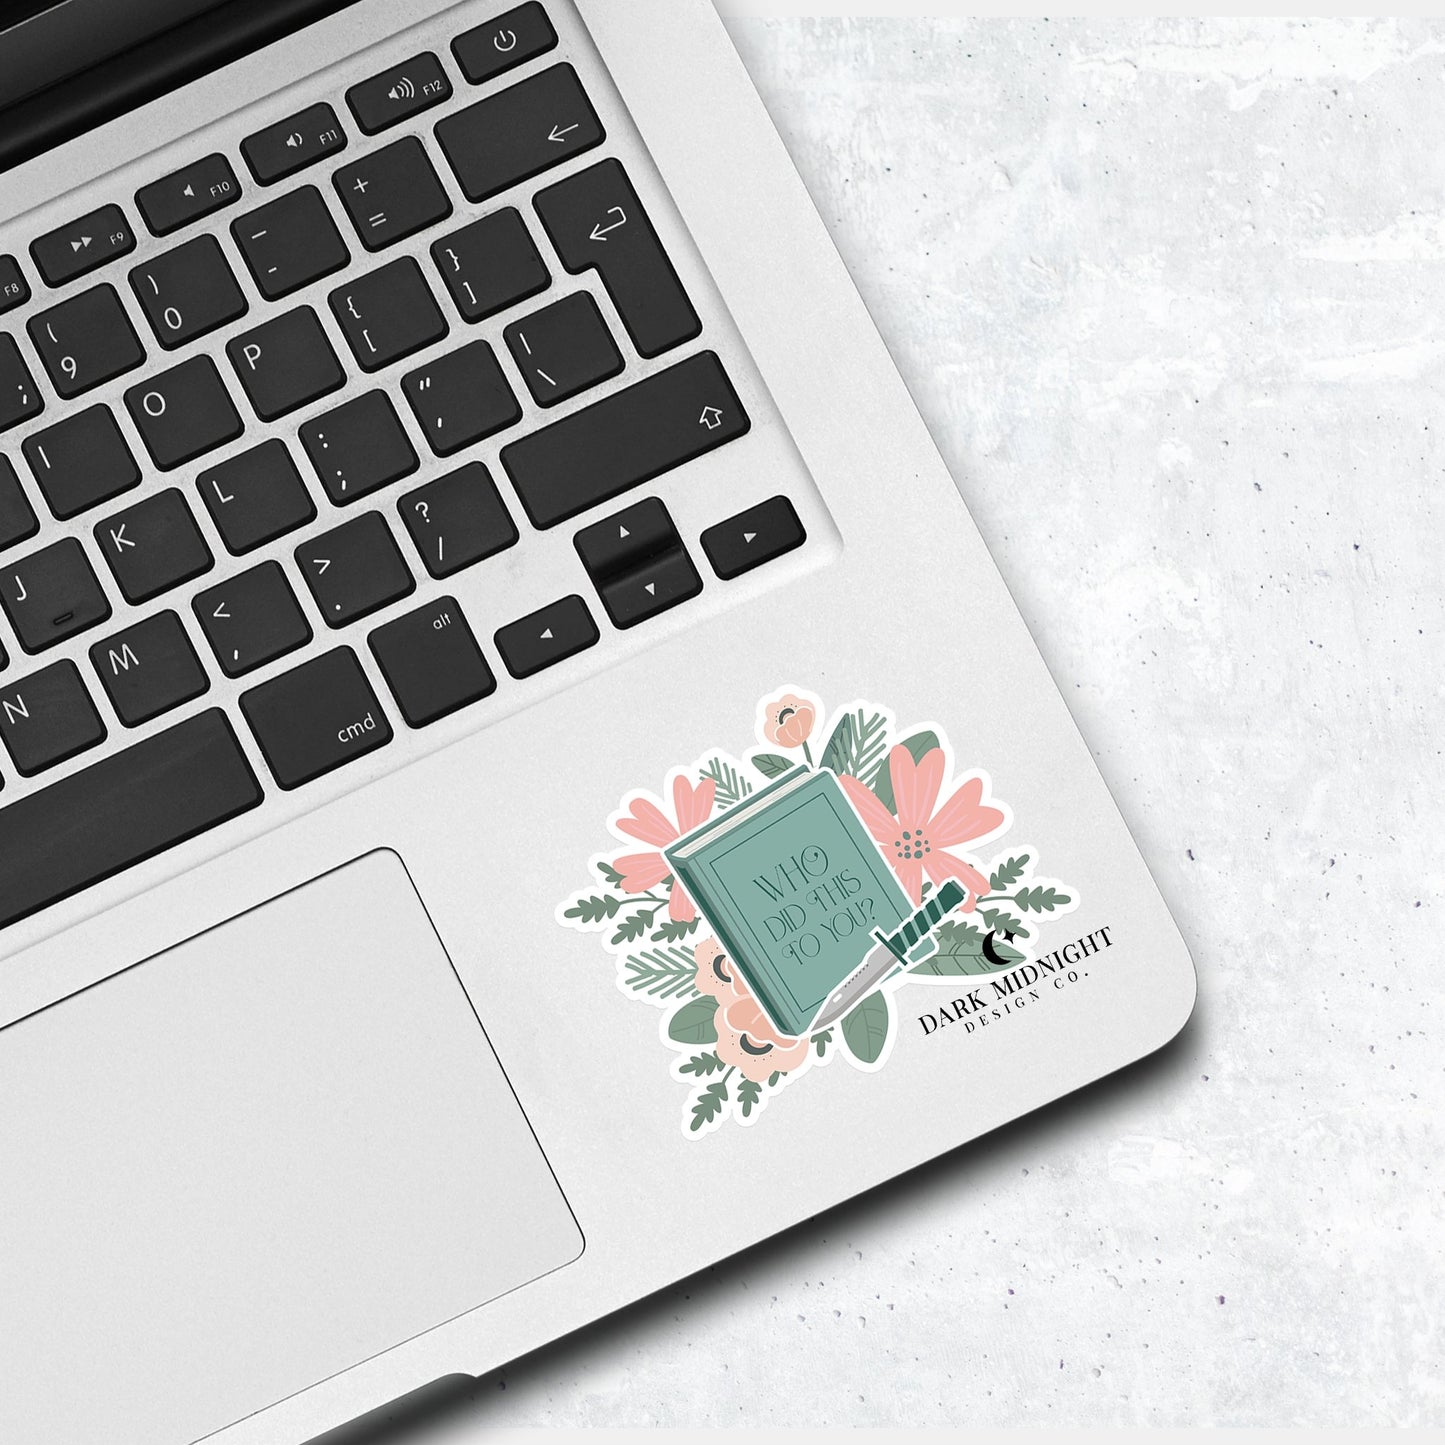 Who Did This To You? - Floral Book Tropes Sticker - Dark Midnight Design Co